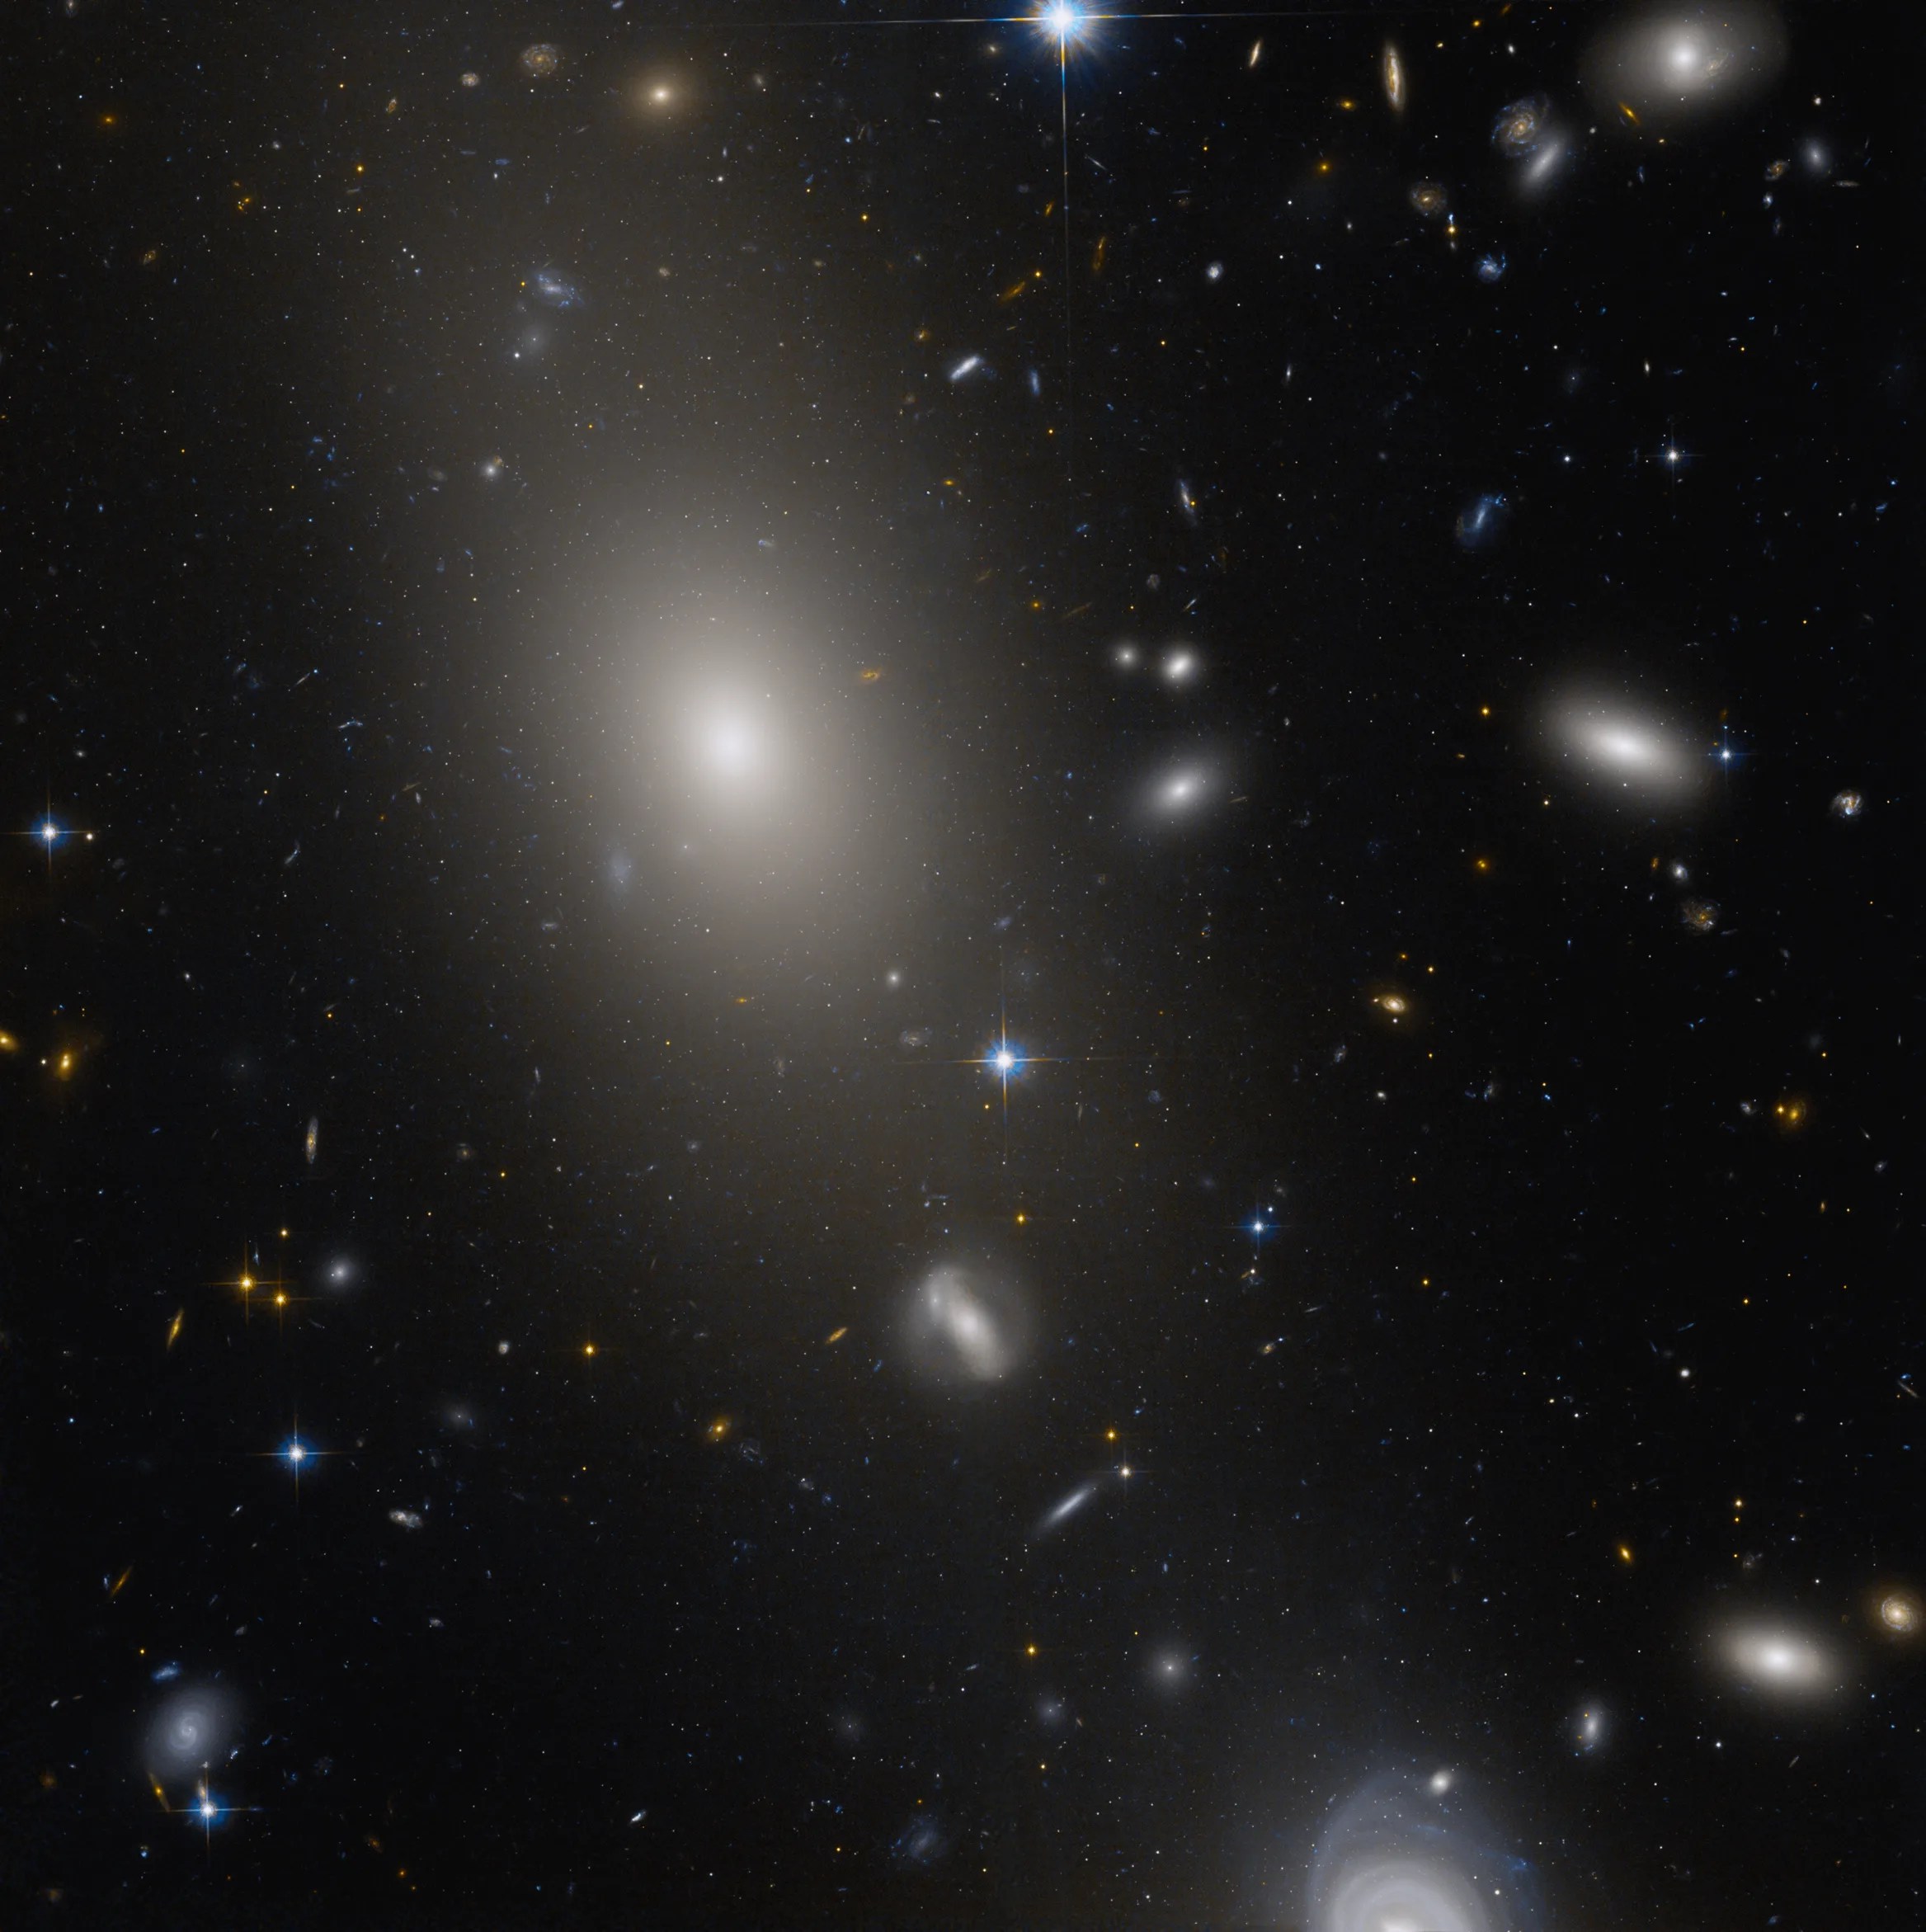 A field of galaxies. a large elliptical galaxy in the top left quadrant, with more distant galaxies visible through its fringes.